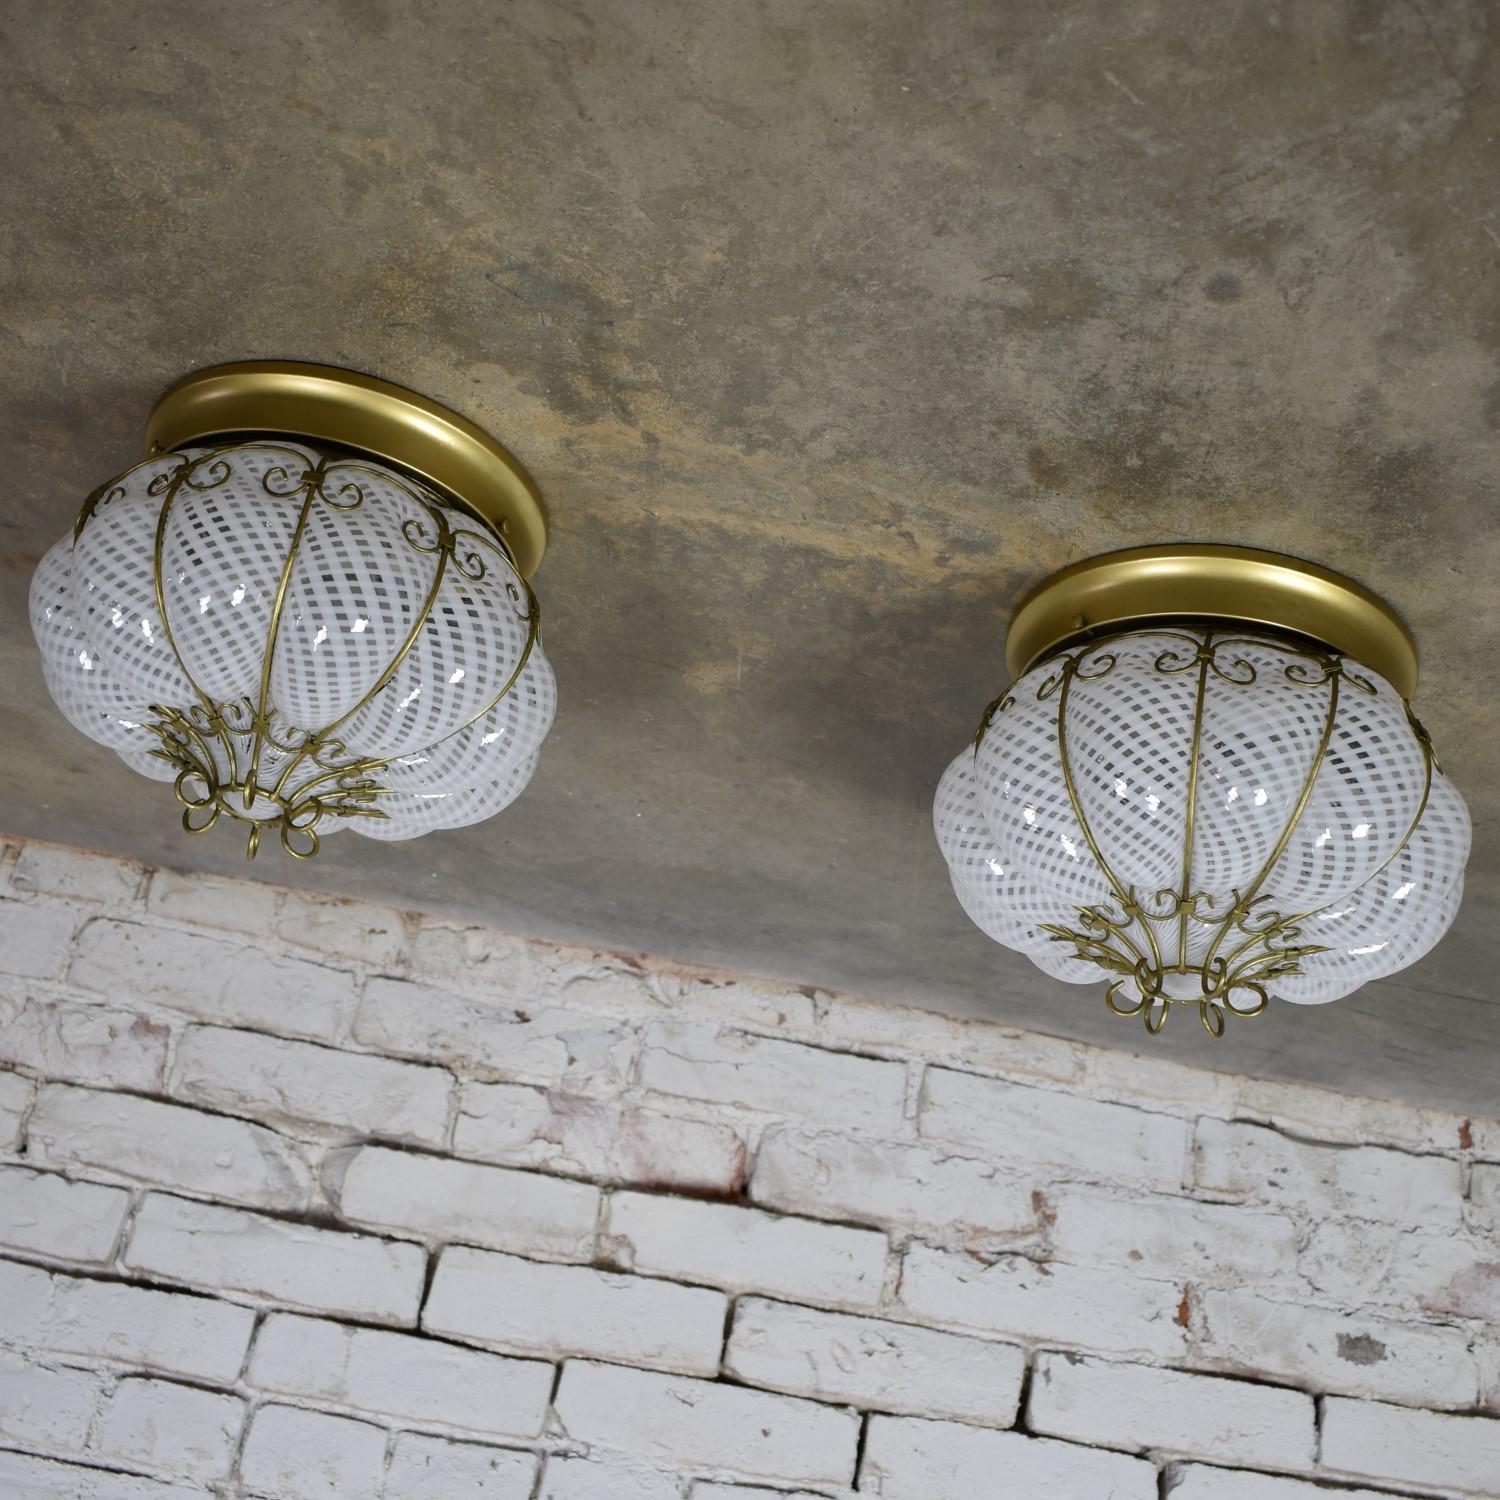 Fabulous pair of midcentury Venetian caged latticino glass ceiling lights in white and gold. They can also be used as wall sconces as the globes are held tight to the fixture with screws. They are in fabulous vintage condition and have new wiring